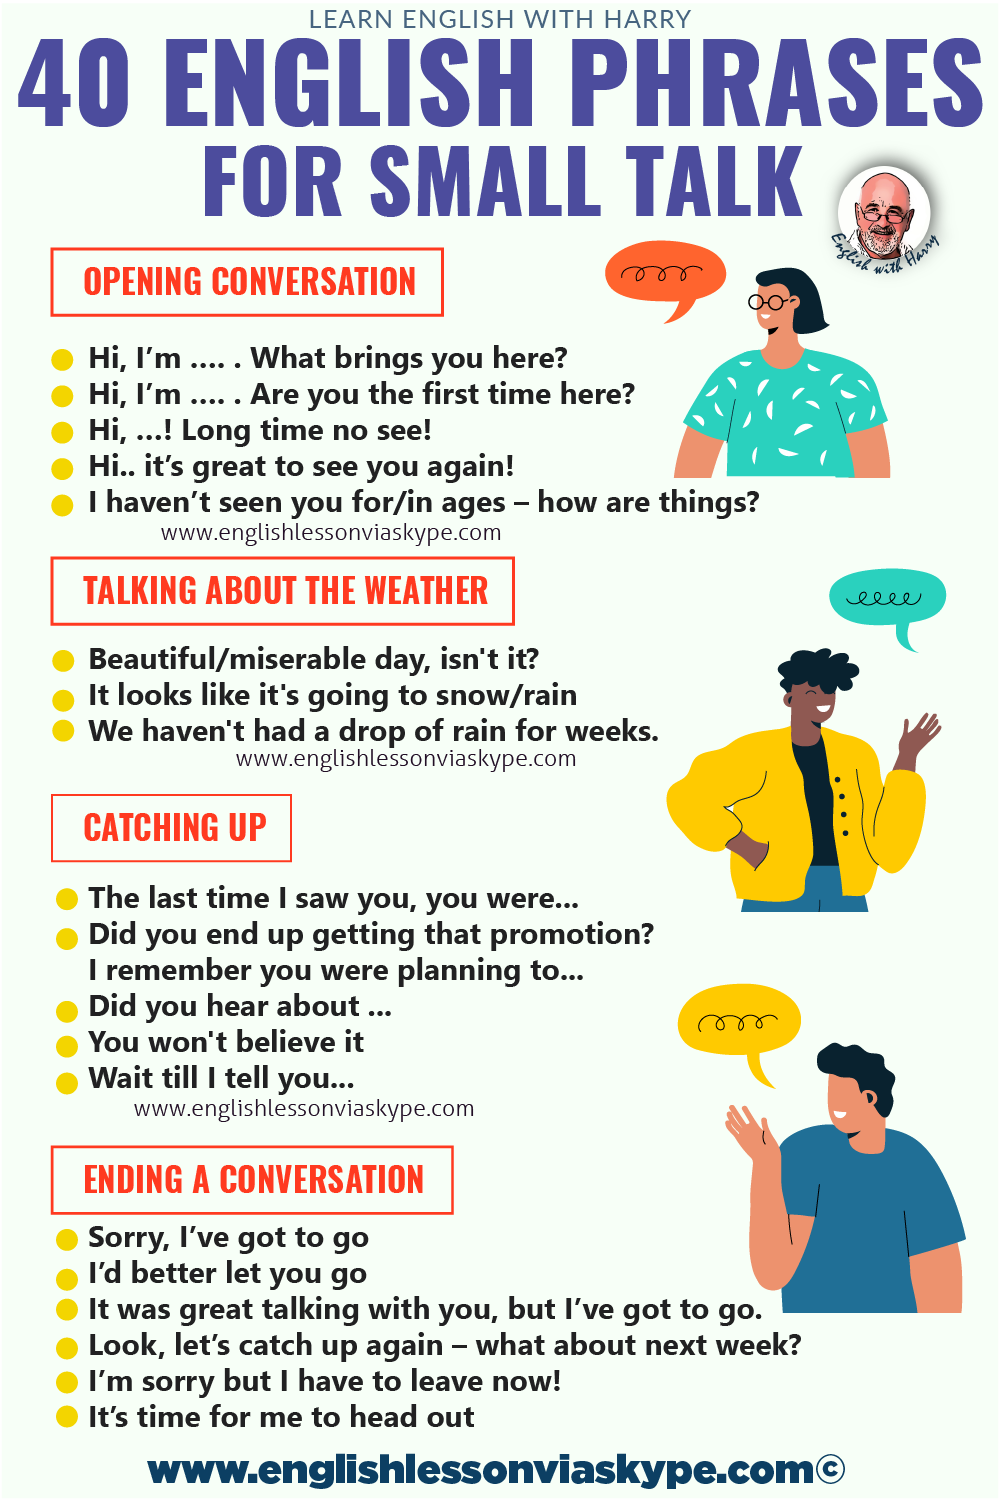 How To Make Small Talk In English • Speak English with Harry 👴